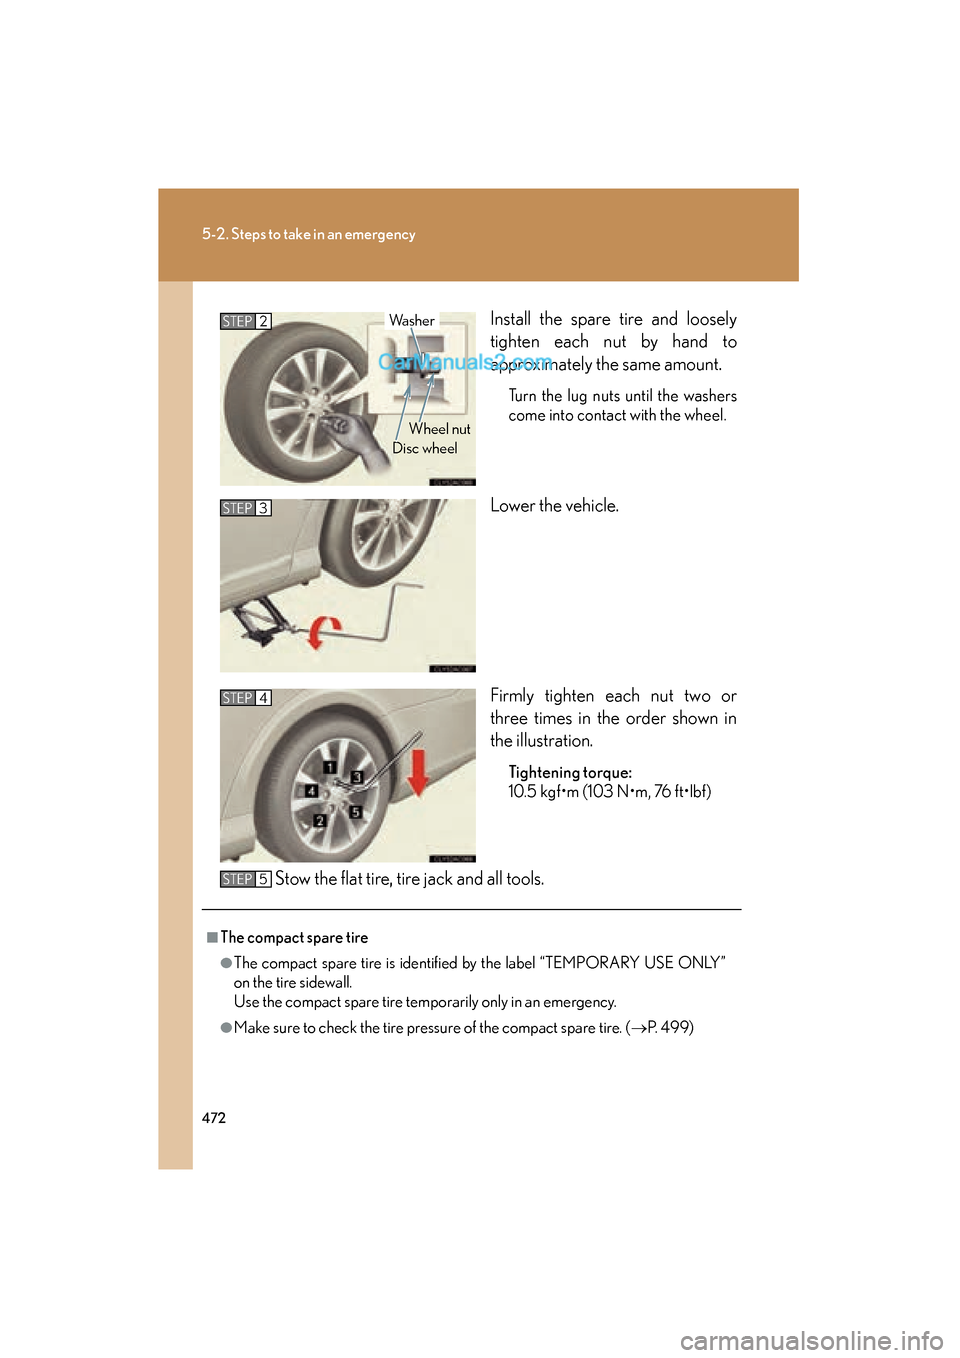 Lexus ES350 2011  s Owners Guide 472
5-2. Steps to take in an emergency
ES350_UInstall the spare tire and loosely
tighten each nut by hand to
approximately the same amount.
Turn the lug nuts until the washers
come into contact with t